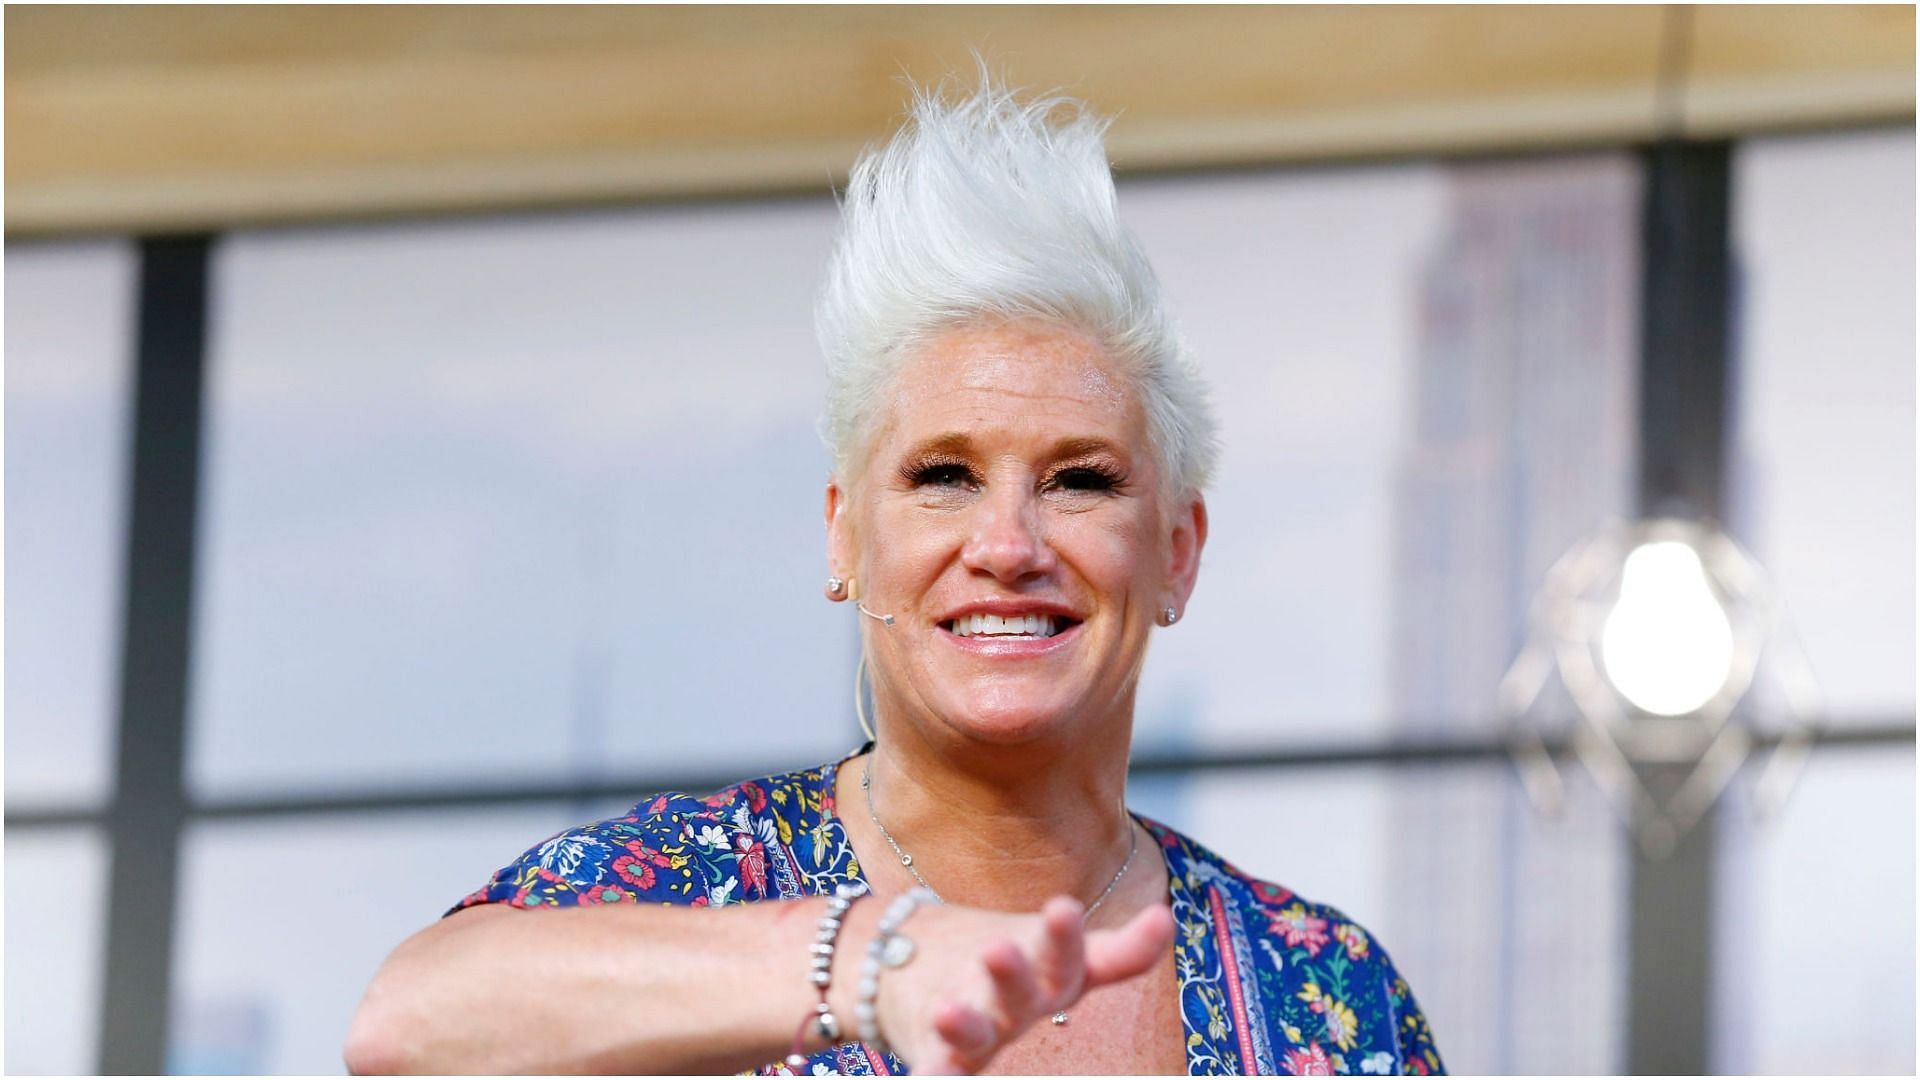 Anne Burrell prepares a dish on stage for a culinary demonstration during the Grand Tasting (Image via Getty Images)